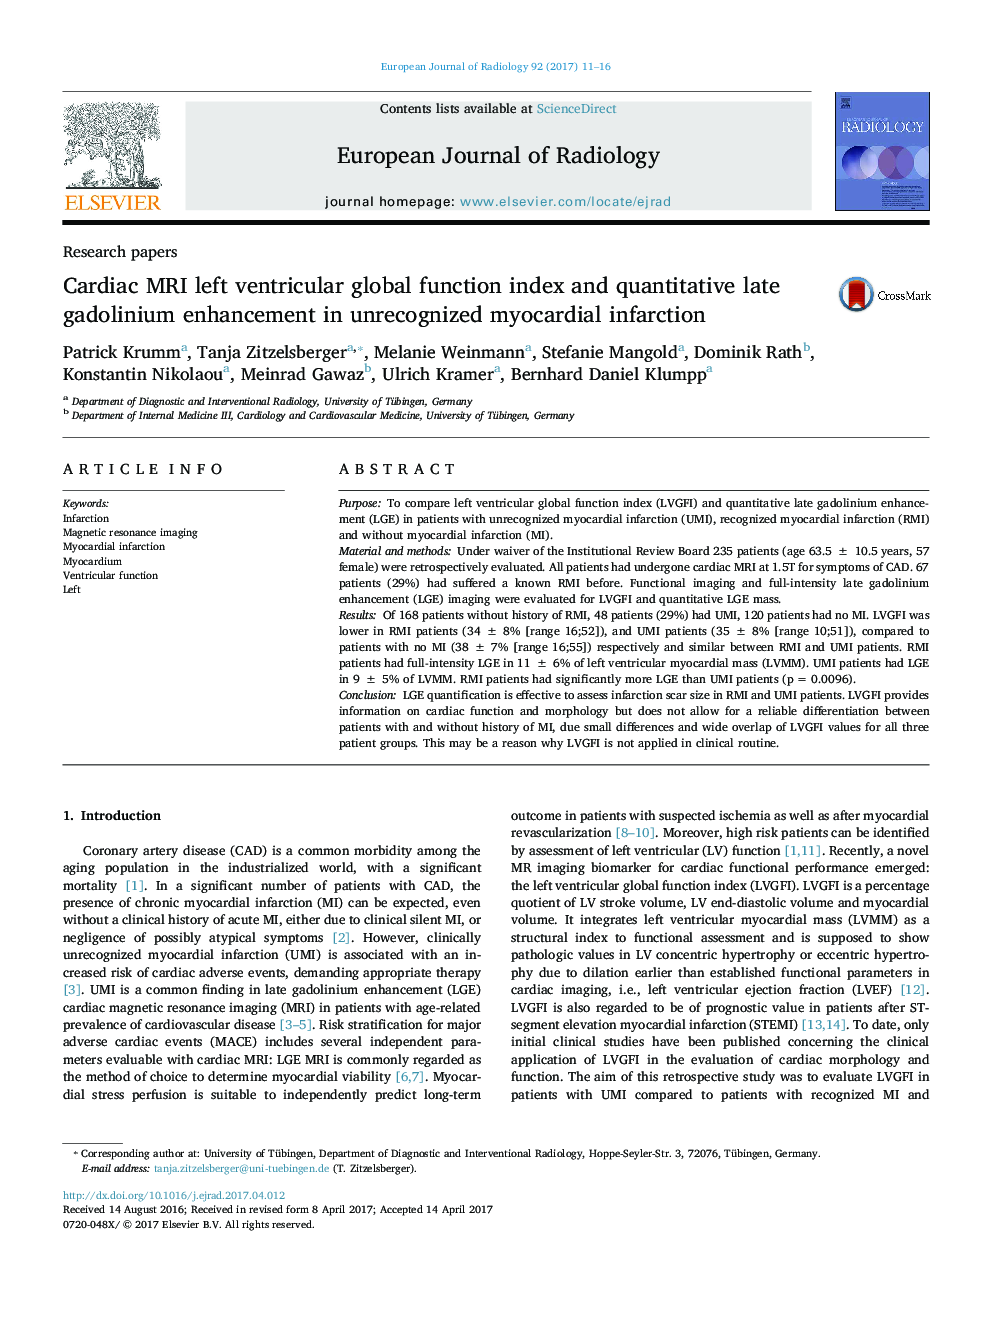 Research papersCardiac MRI left ventricular global function index and quantitative late gadolinium enhancement in unrecognized myocardial infarction